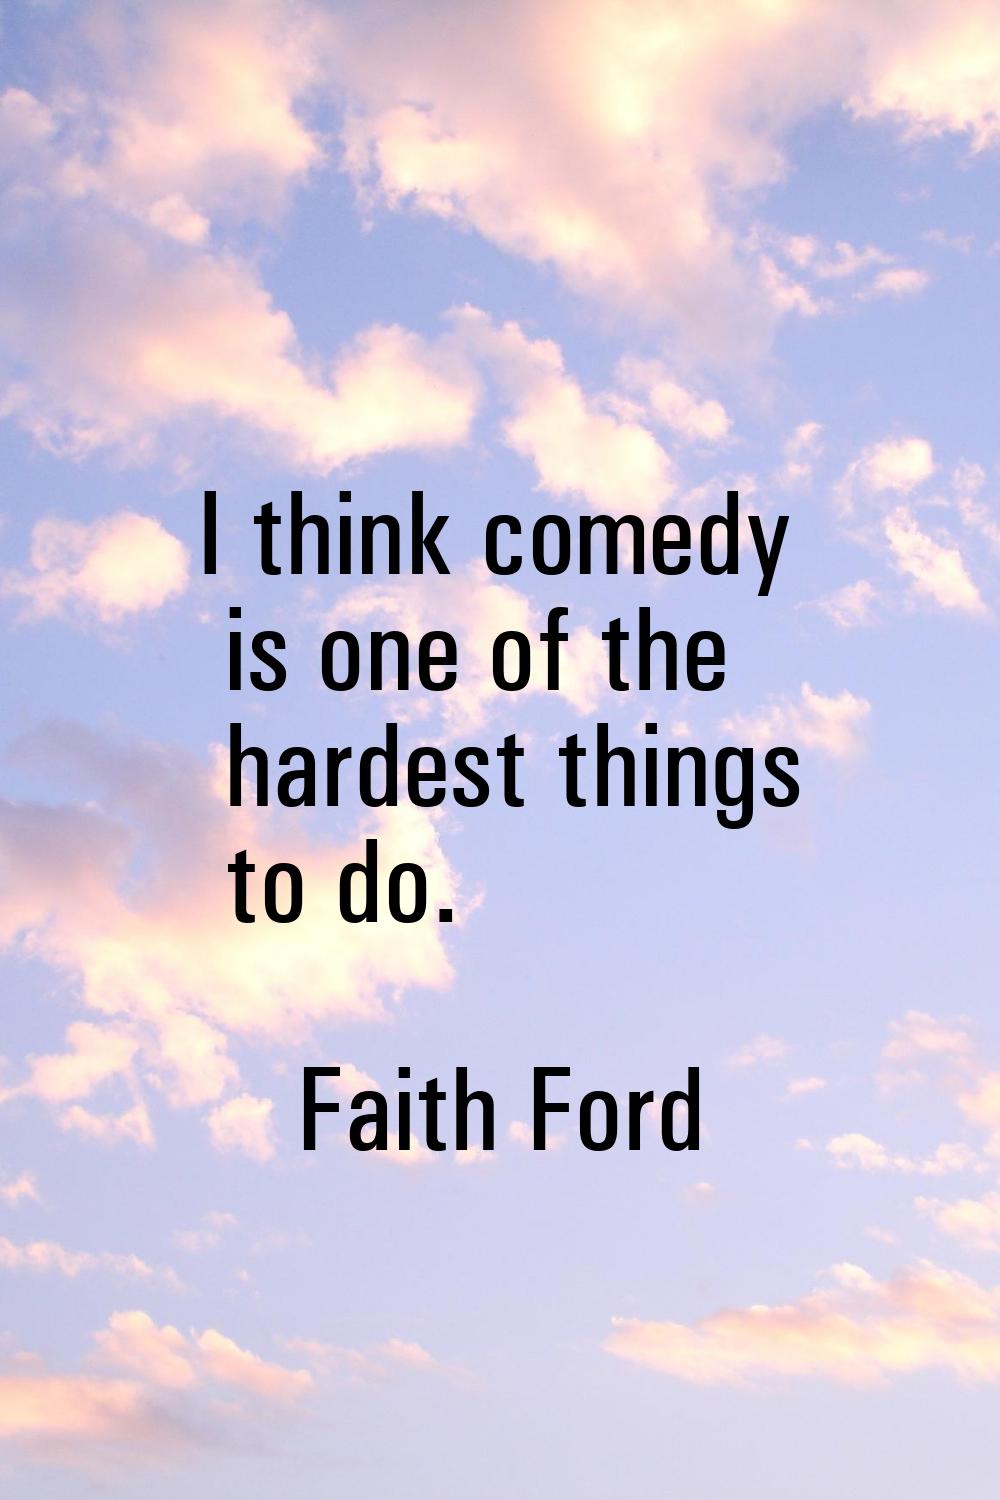 I think comedy is one of the hardest things to do.